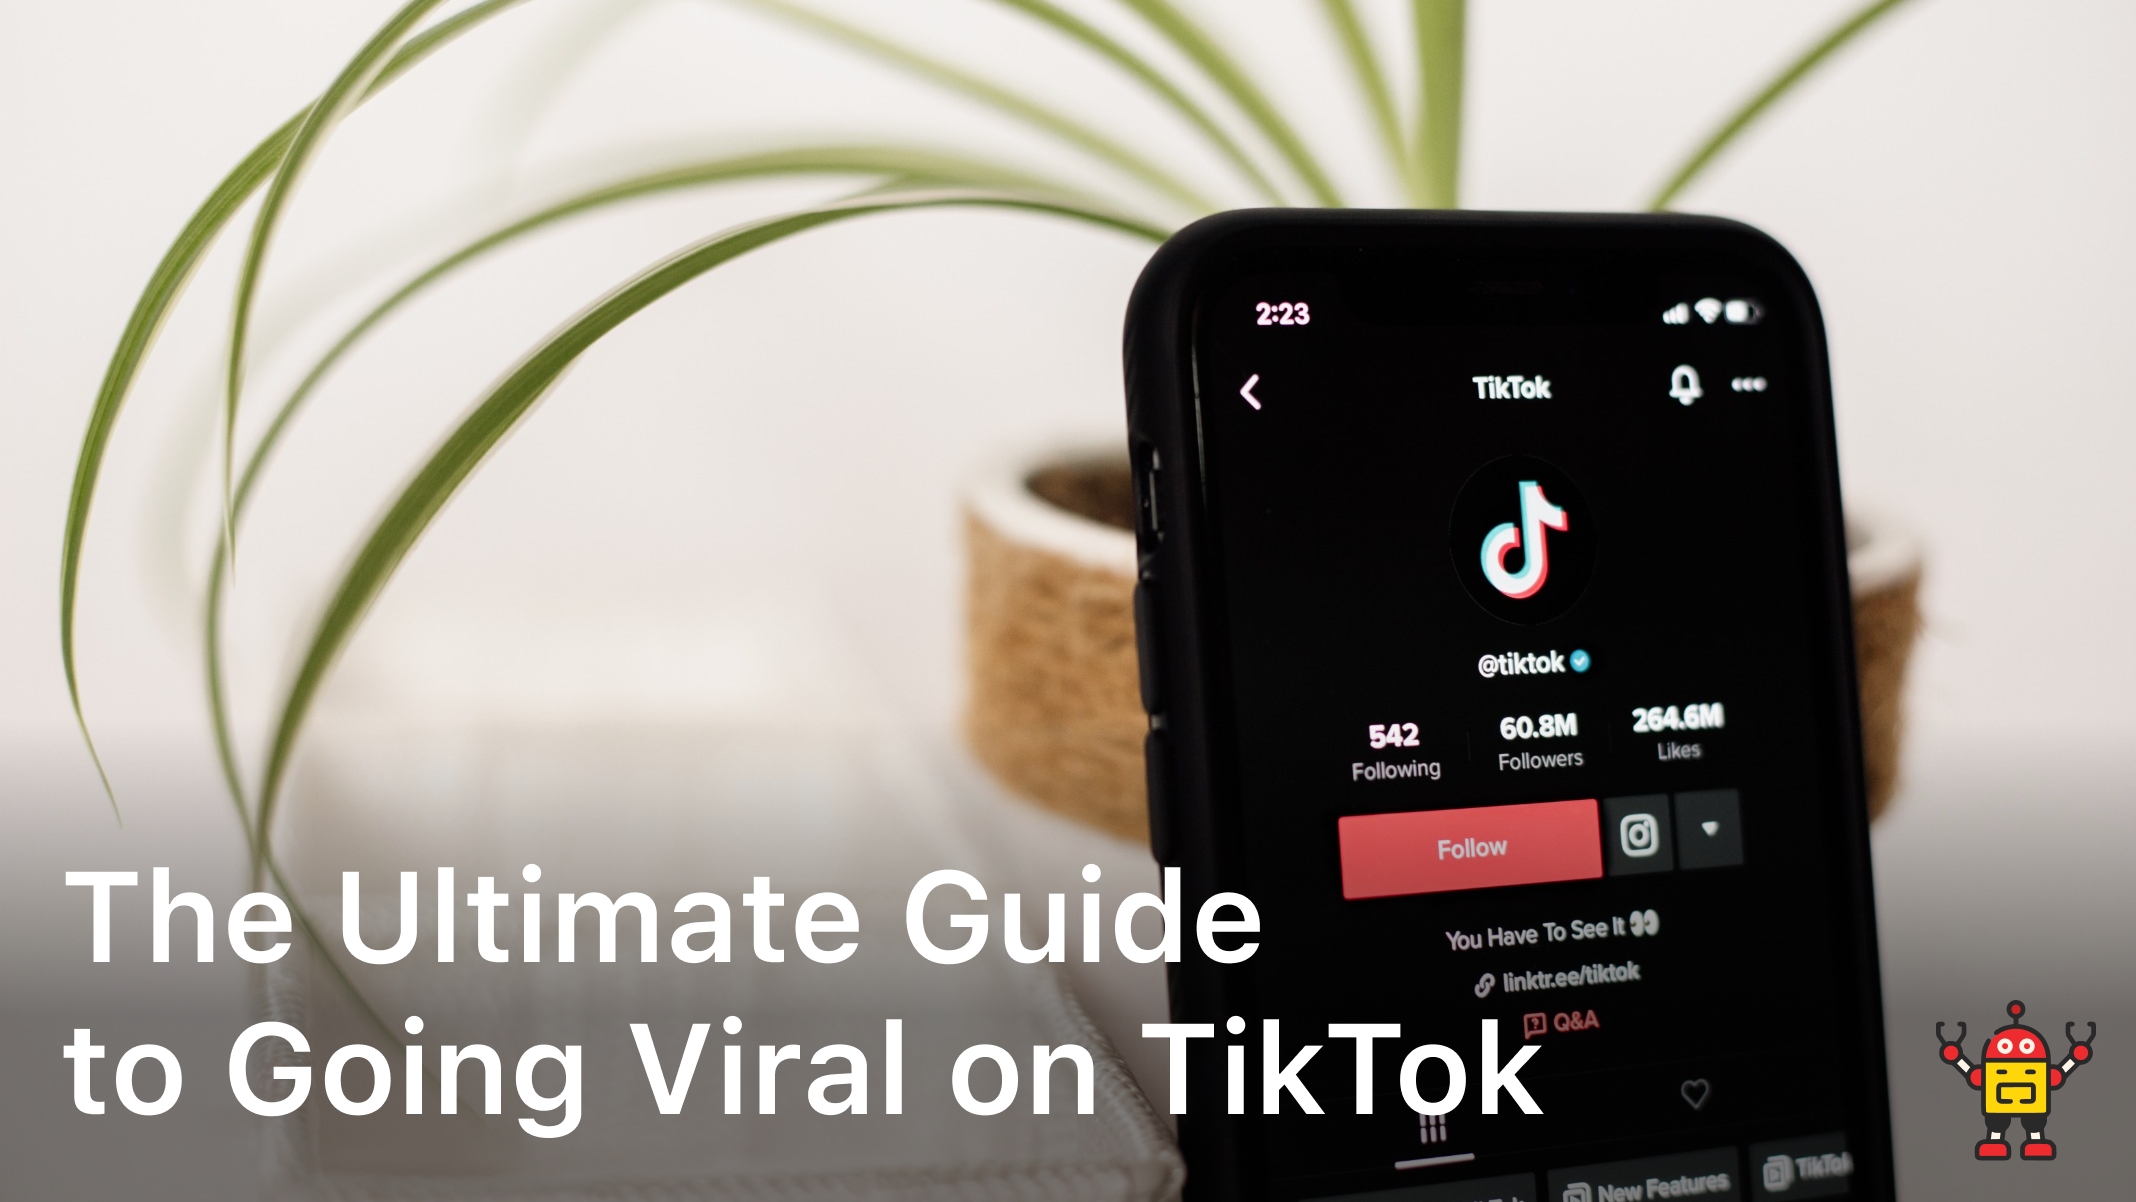 The Ultimate Guide to Going Viral on TikTok